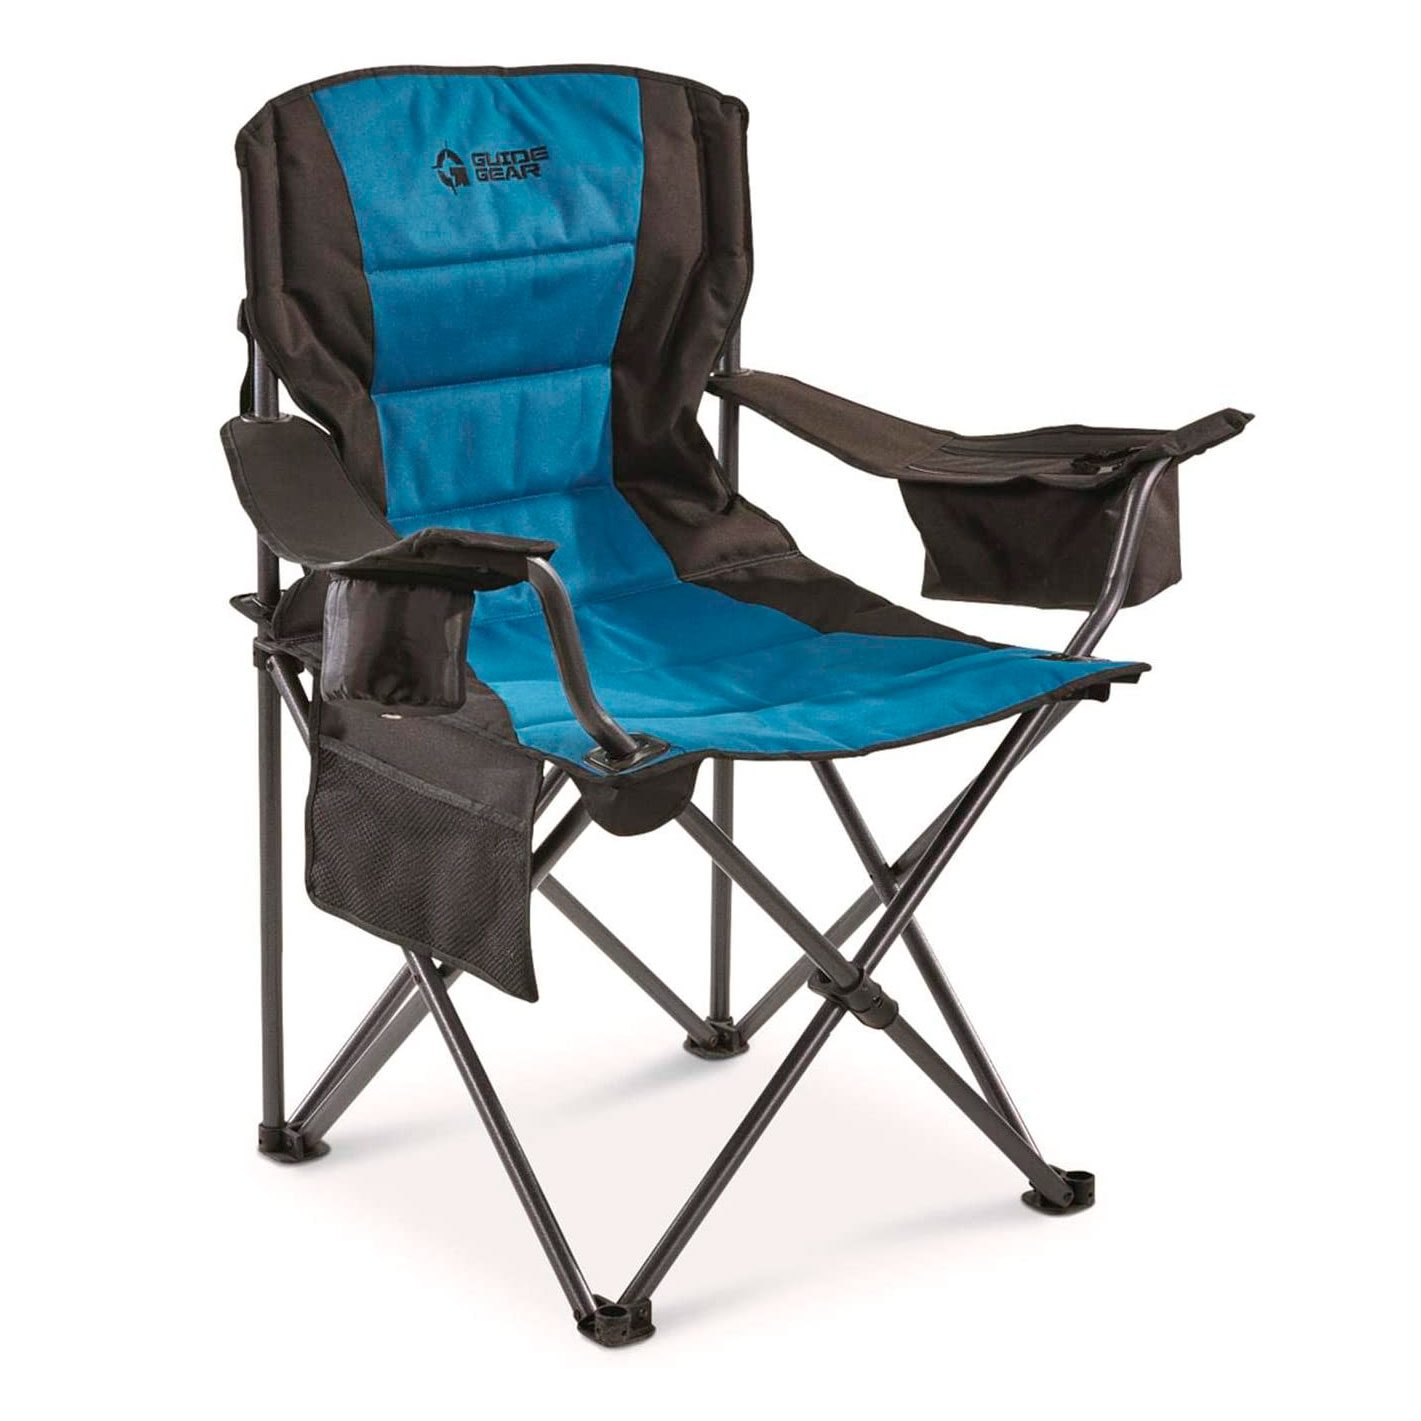 12 Best Beach Chairs for 2021 | Light, Easy-to-Carry, Roomy Beach Chairs